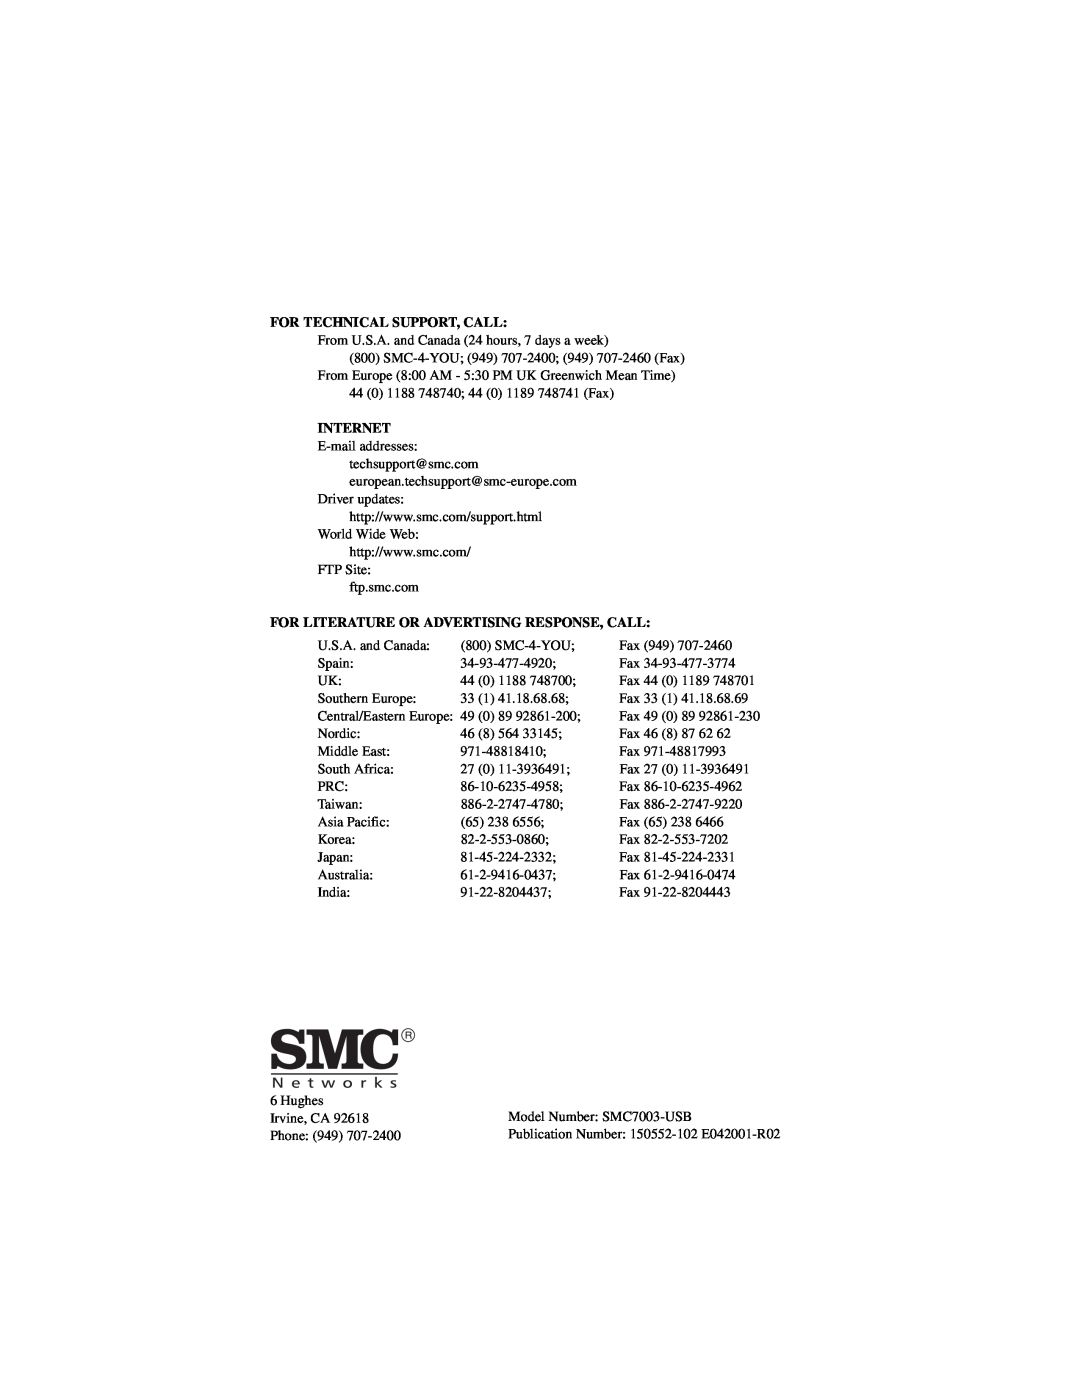 SMC Networks SMC7003-USB manual For Technical Support, Call, Internet, For Literature Or Advertising Response, Call 